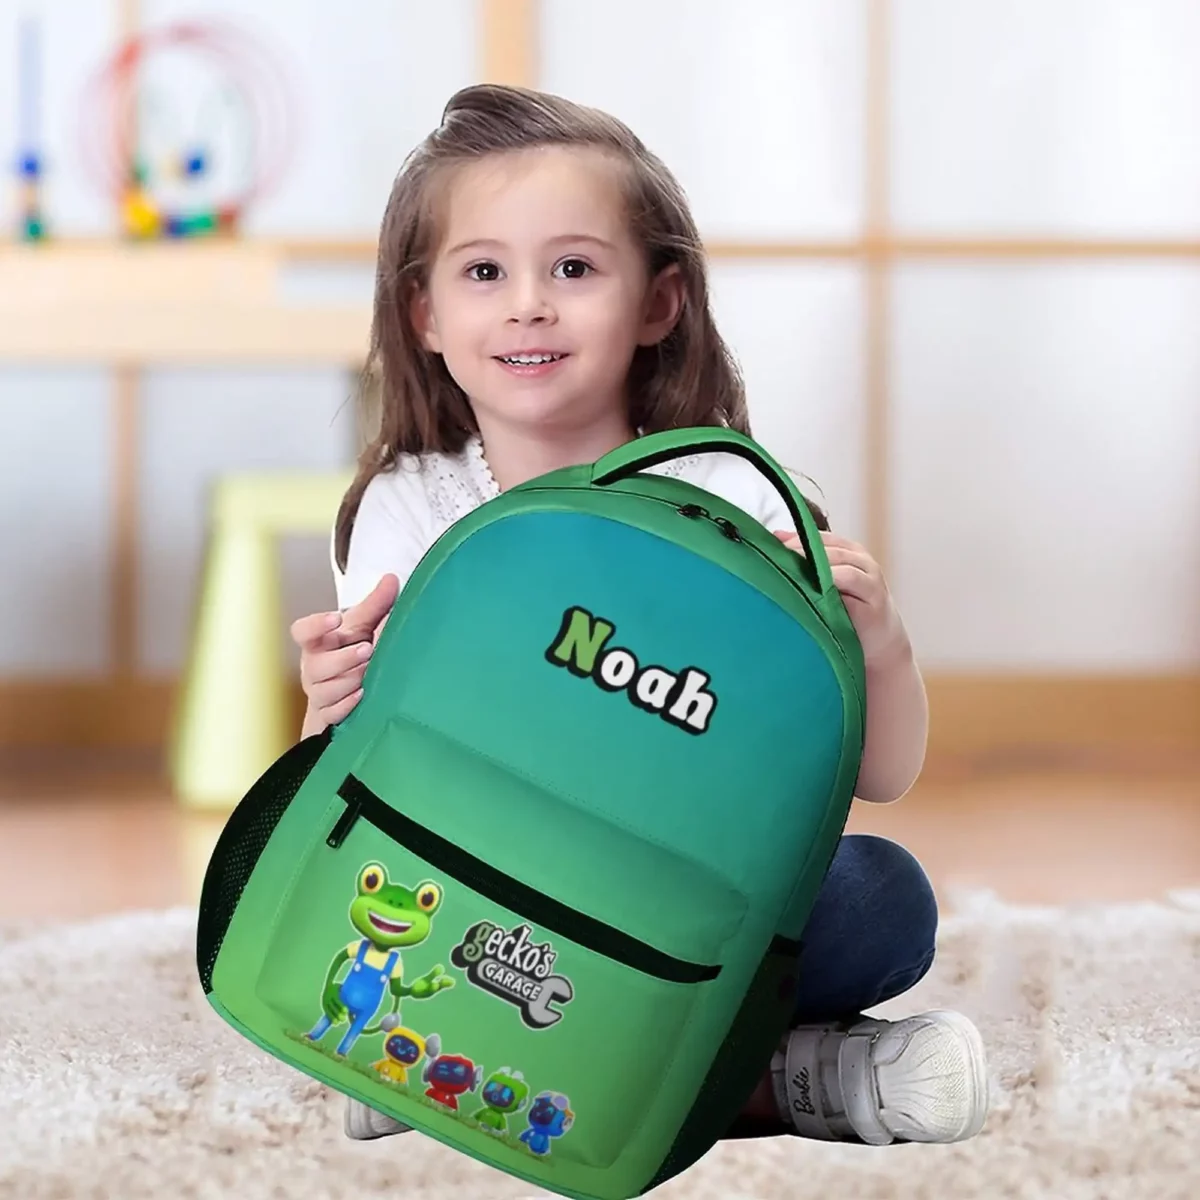 Green Gecko’s Garage Backpack with characters on front pocket Cool Kiddo 22